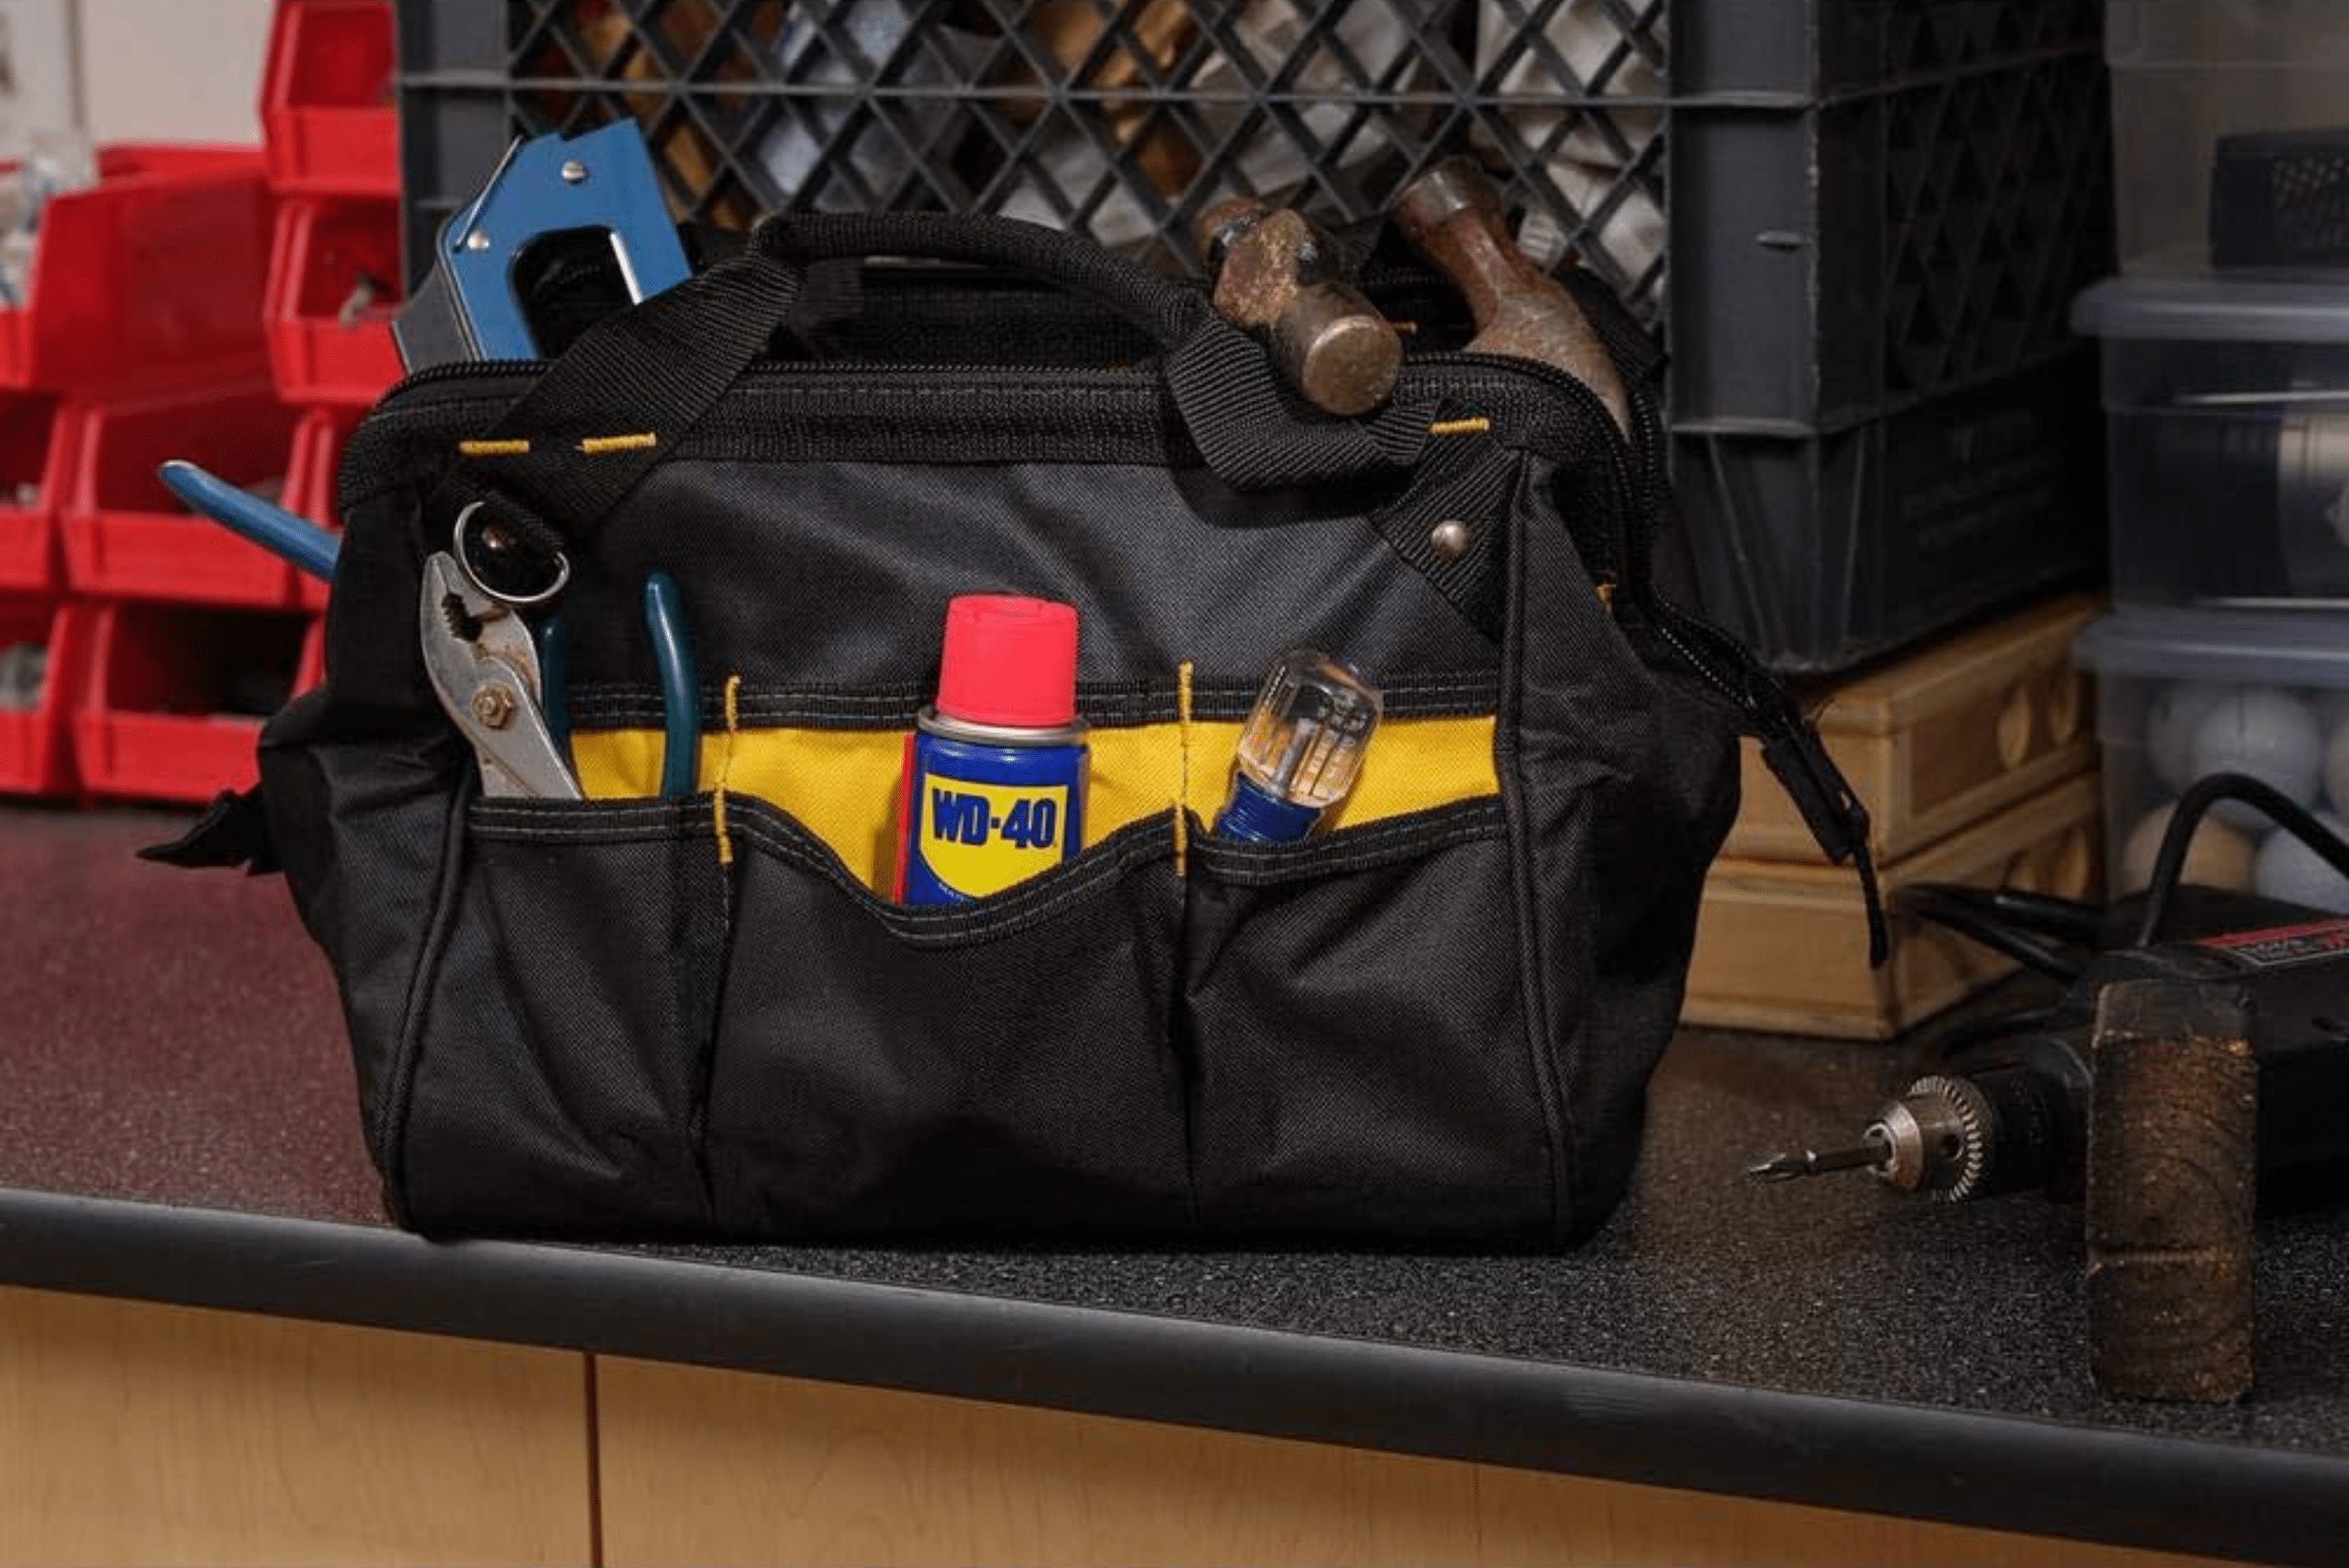 A tool bag with WD-40 spray in one of the pockets.